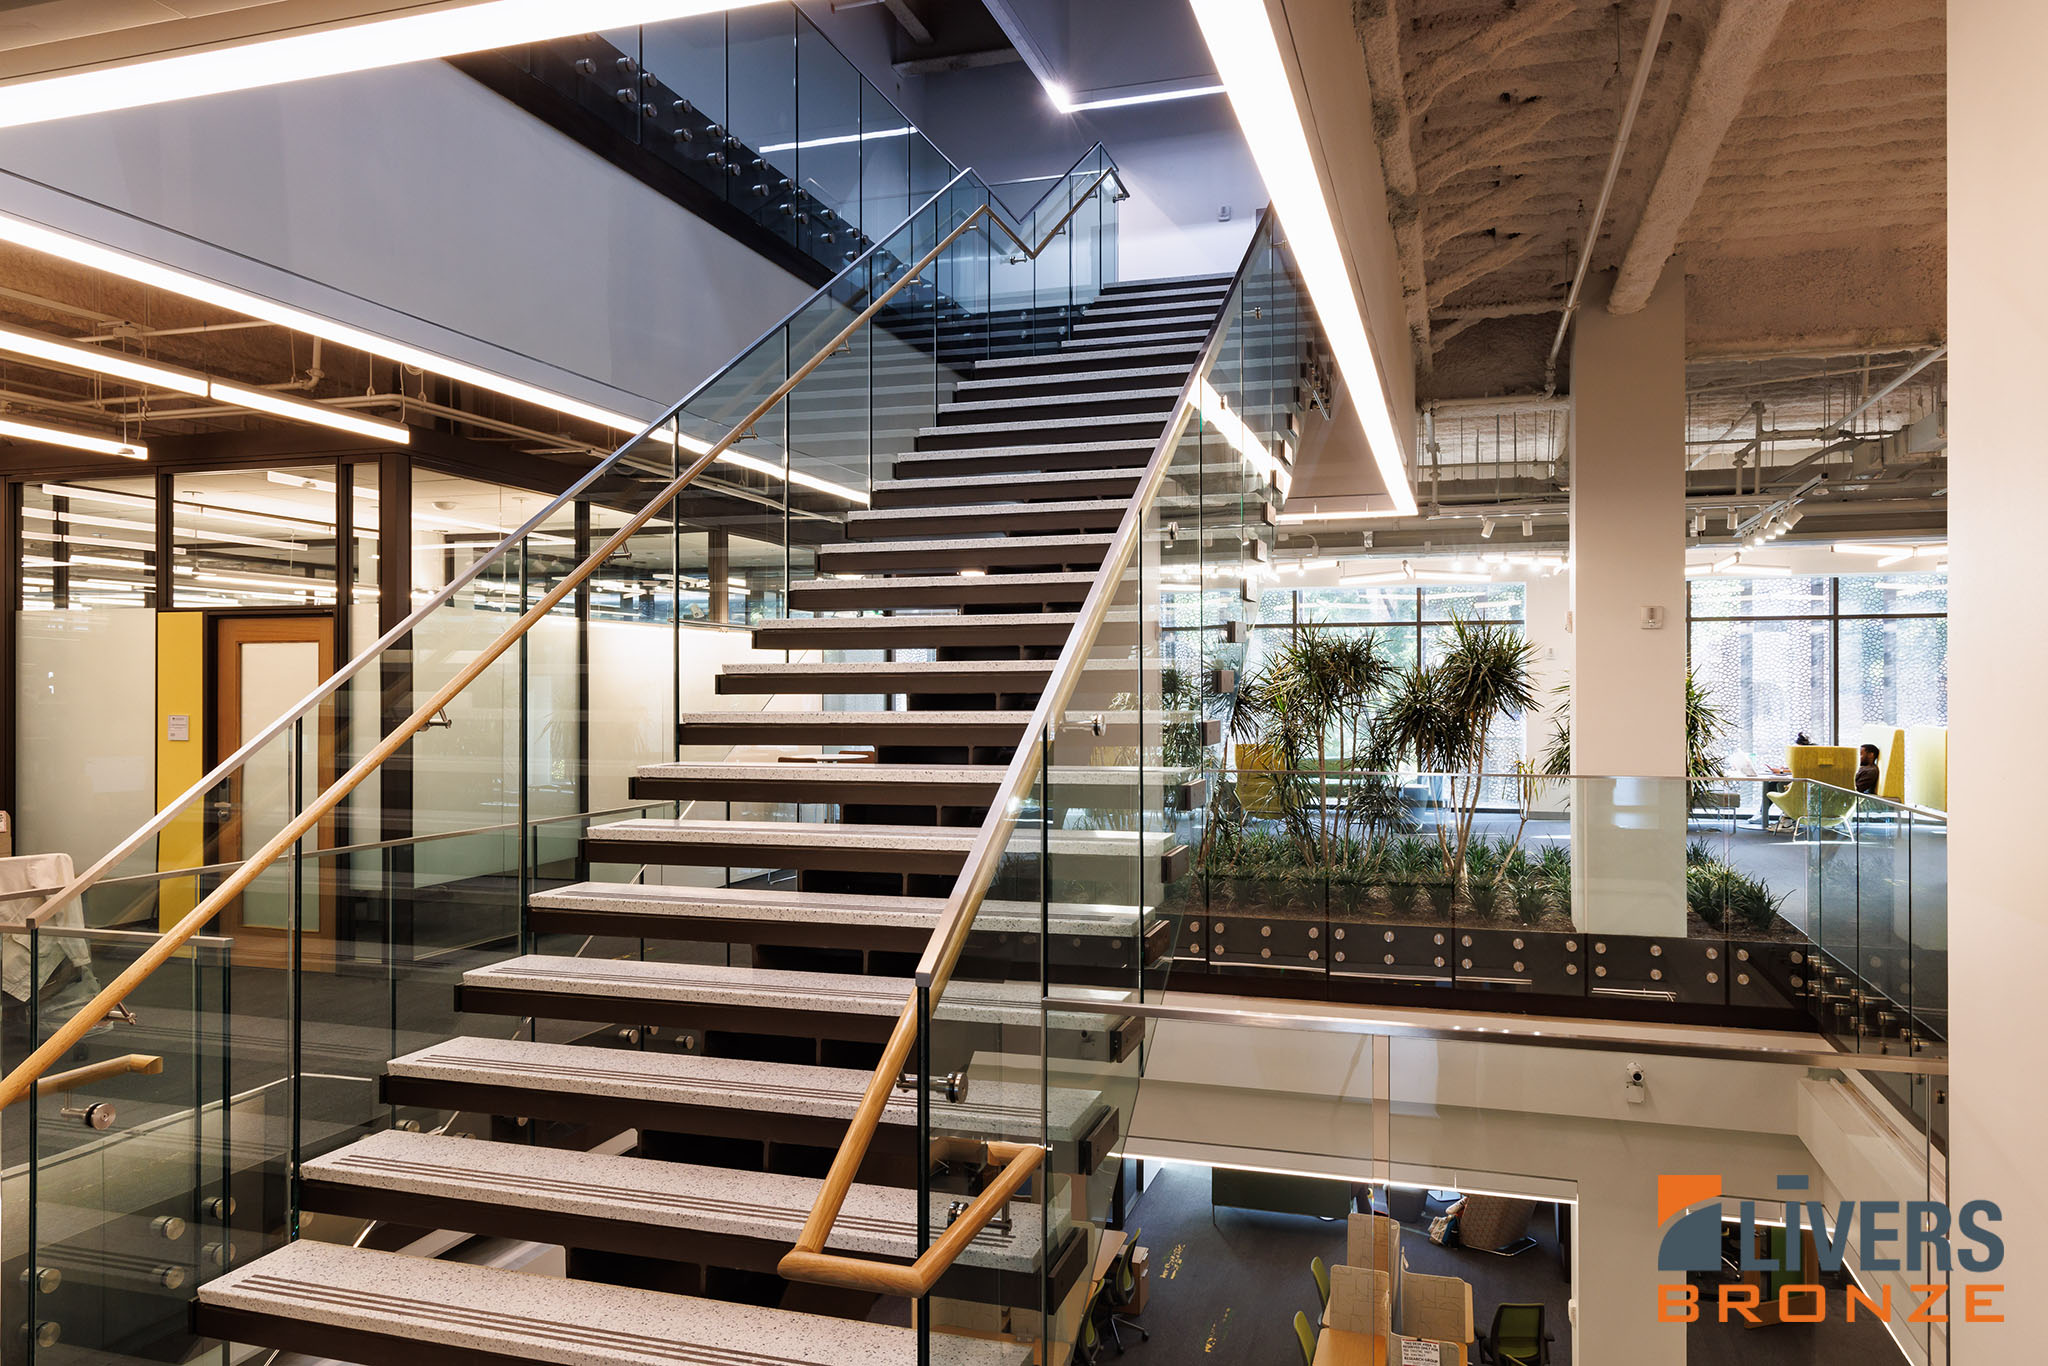 Livers Bronze Button Glass Railing System with laminated glass was installed at the lobby stairway at Lehigh University's Health, Science & Technology Building and is Made in the USA.